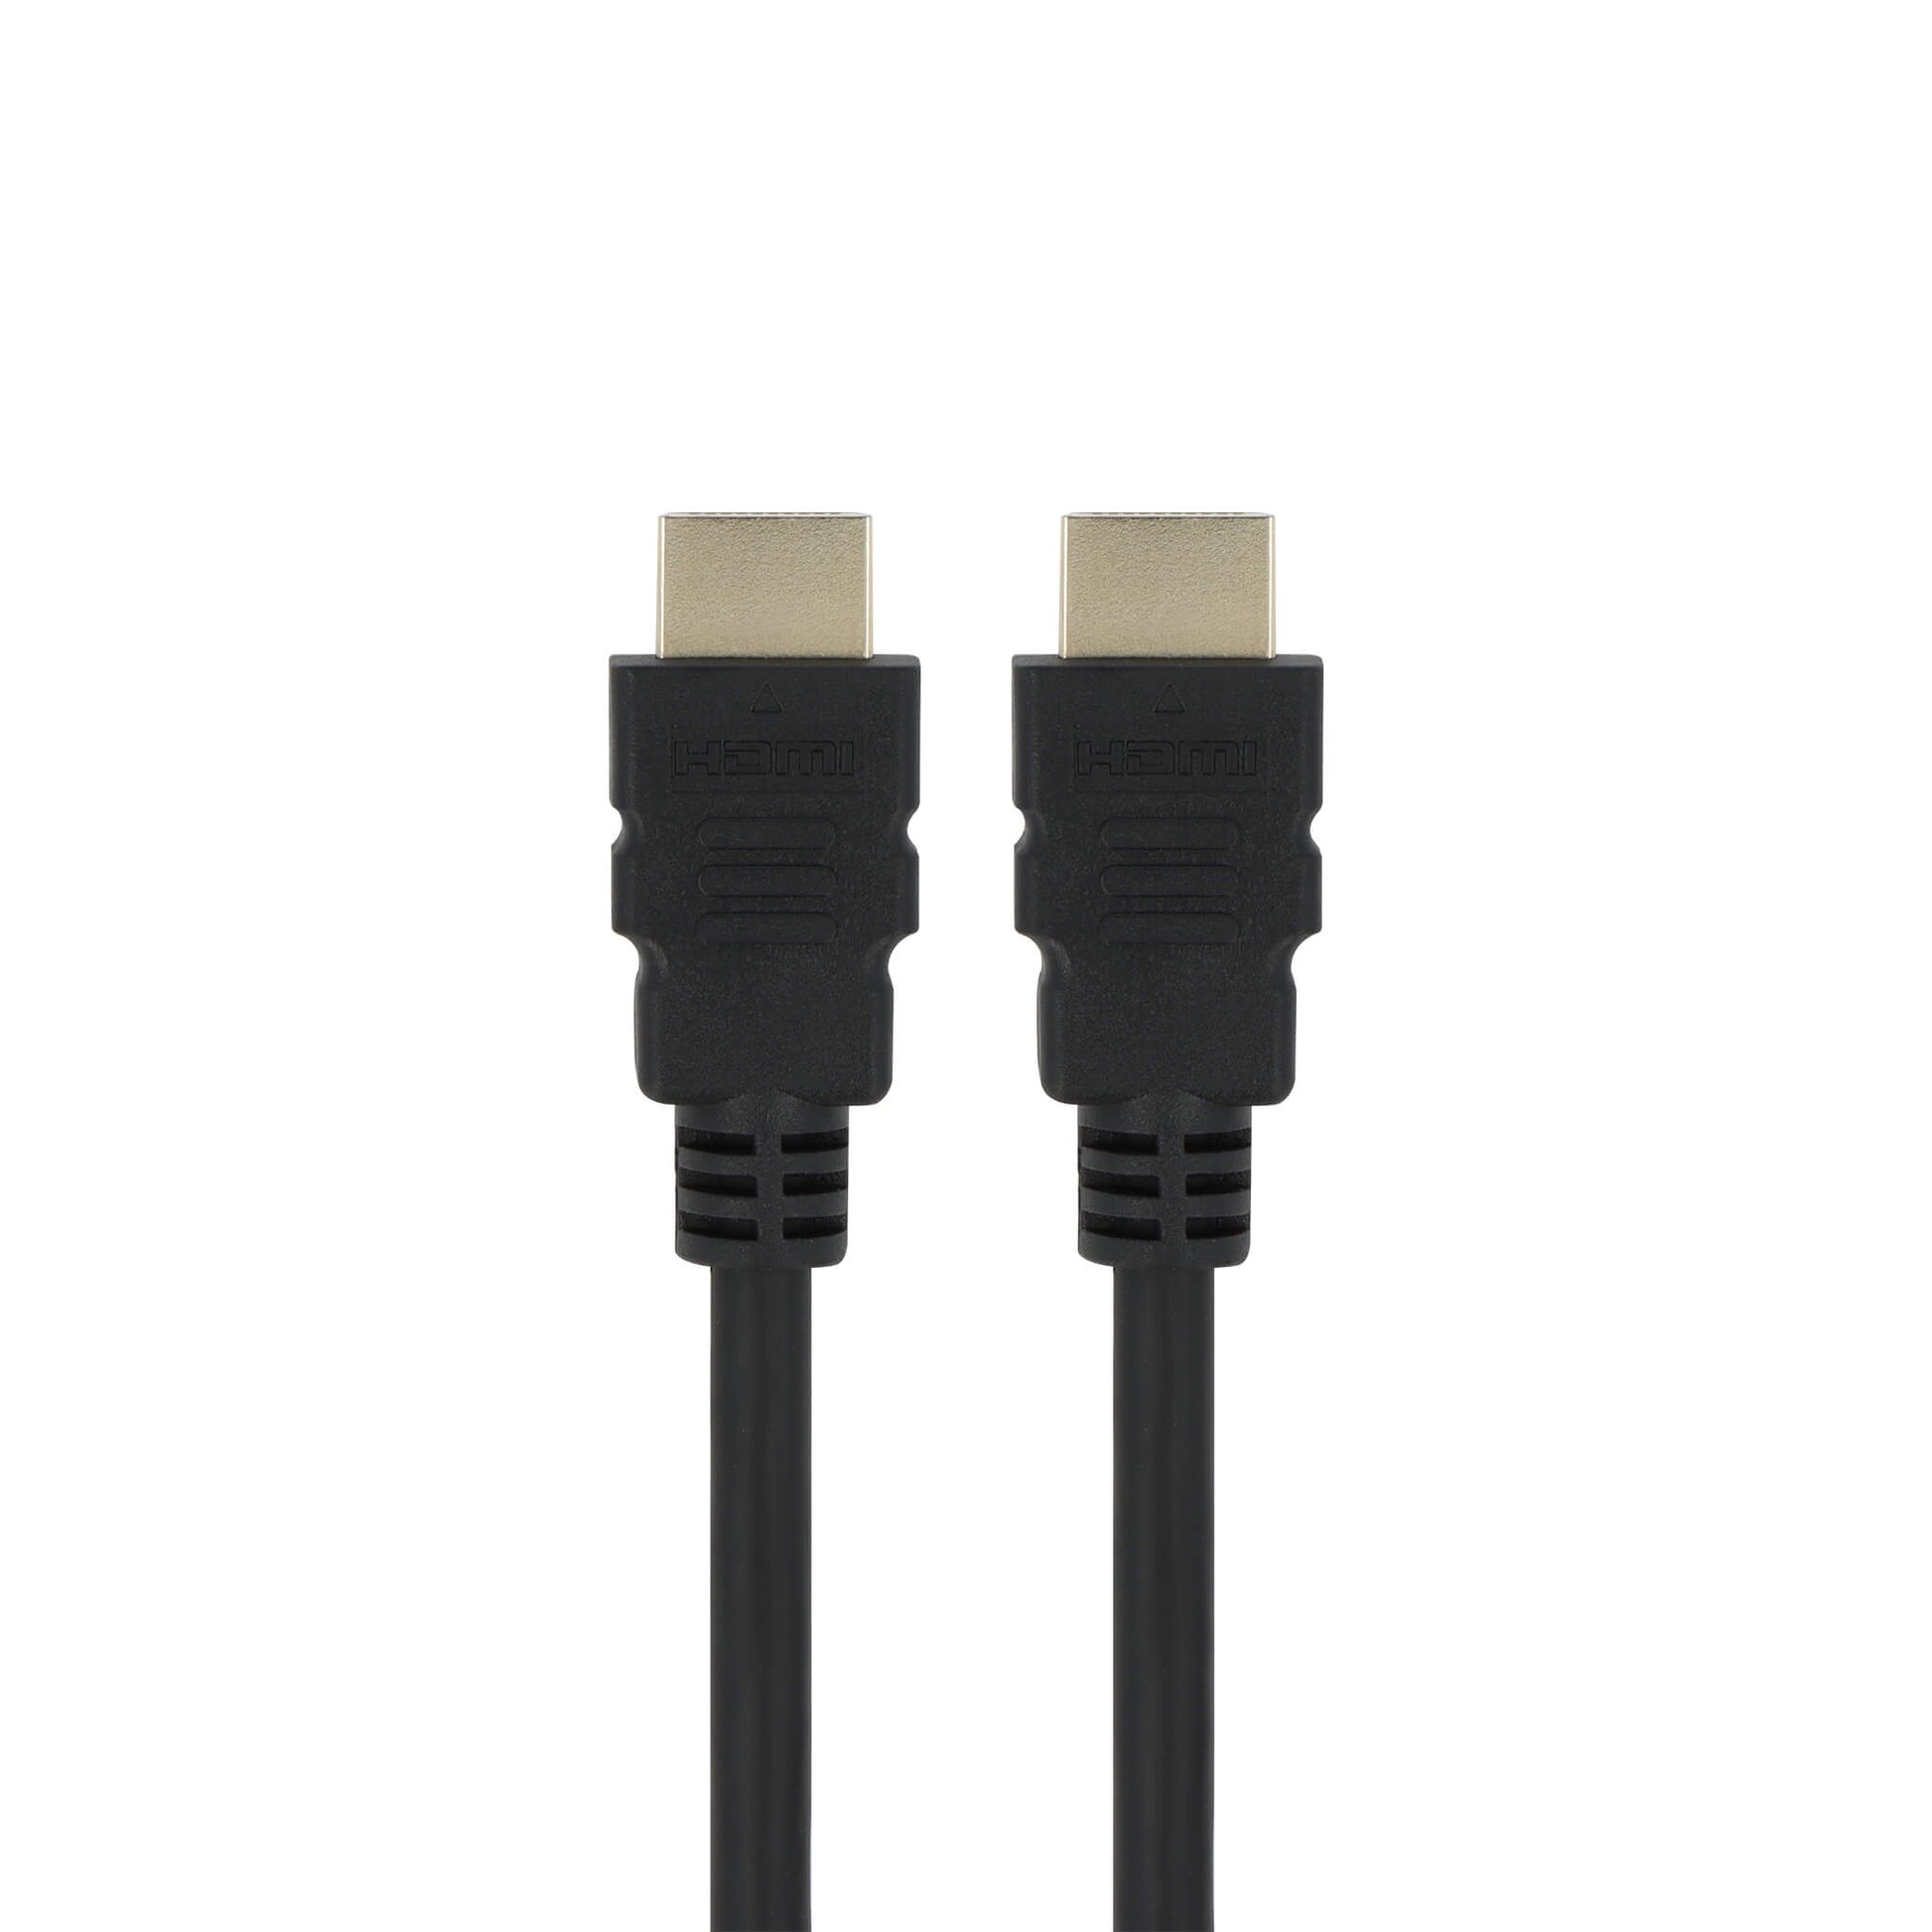 Cable HDMI 2.1 UltraSpeed 28AWG 3m Biwond > Informatica > Cables y  Conectores > Cables HDMI